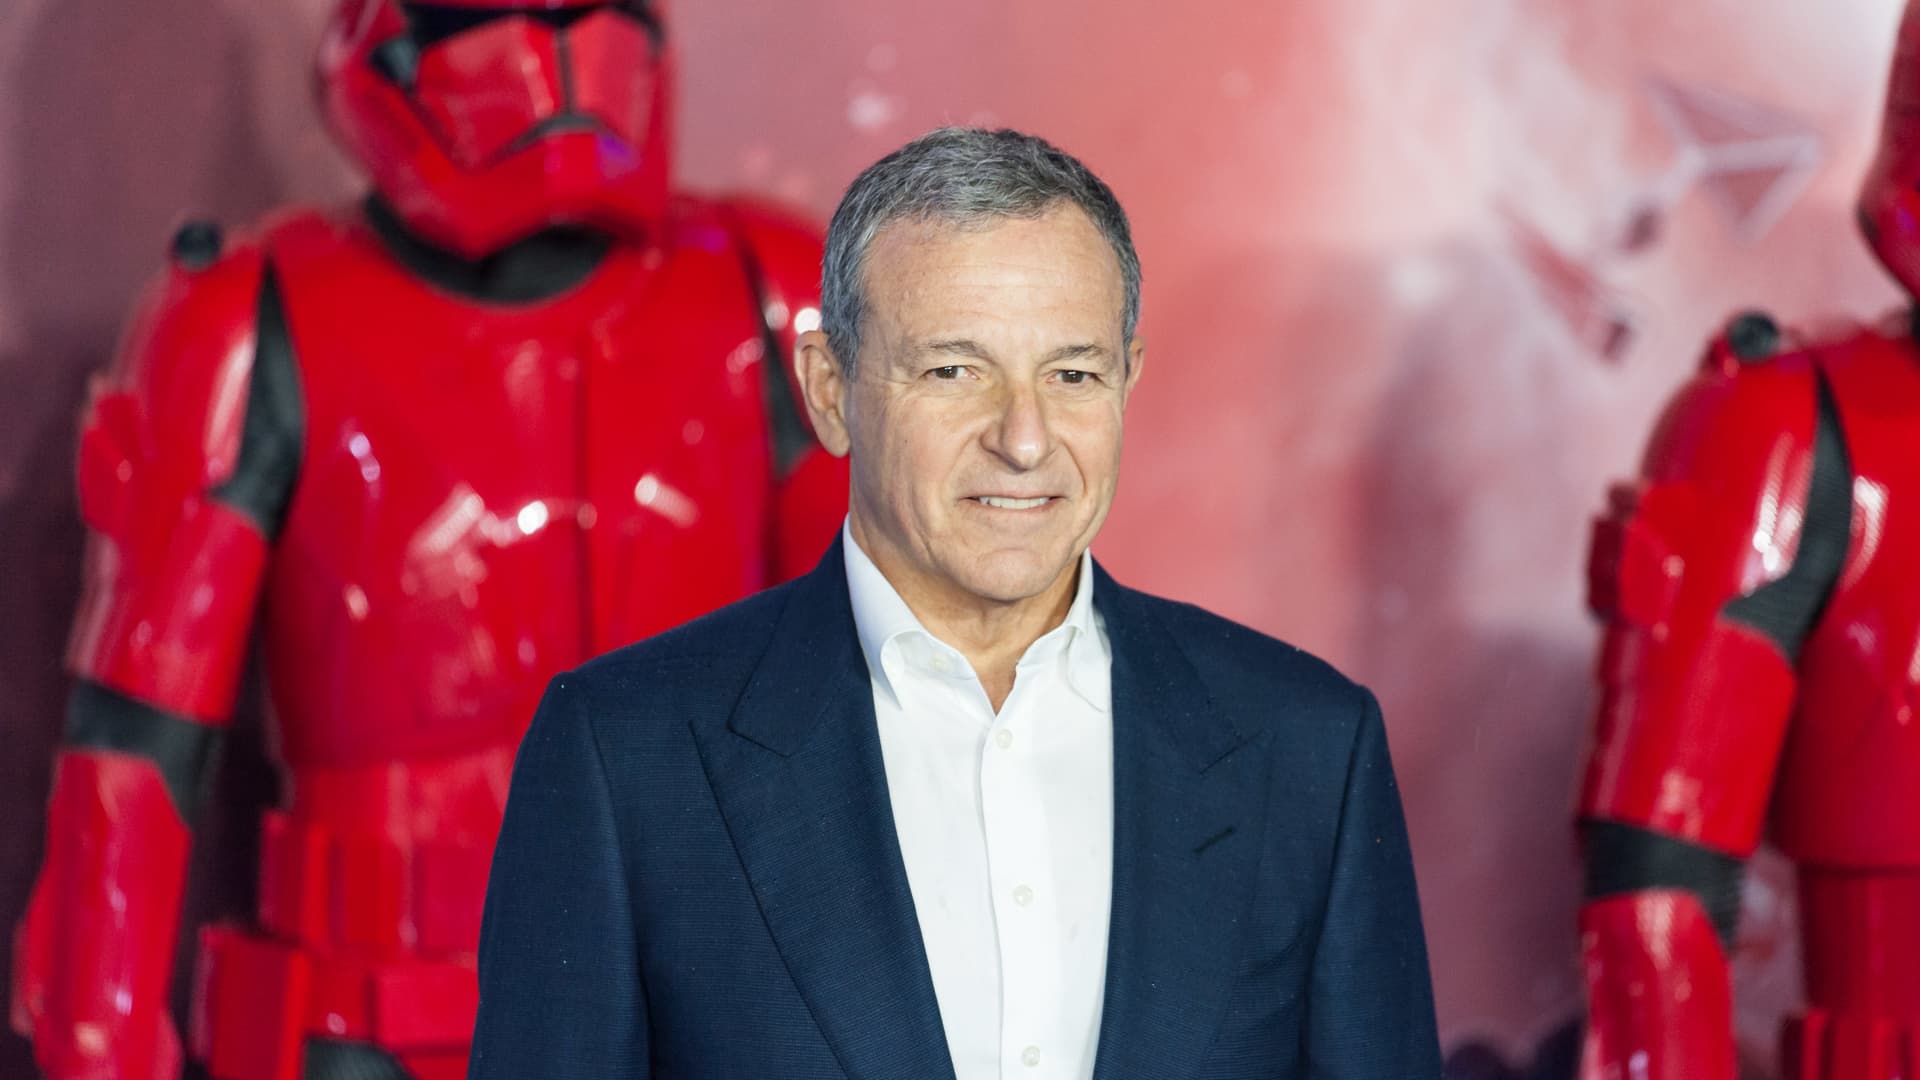 Disney blindsided Chapek with decision to replace him with Iger